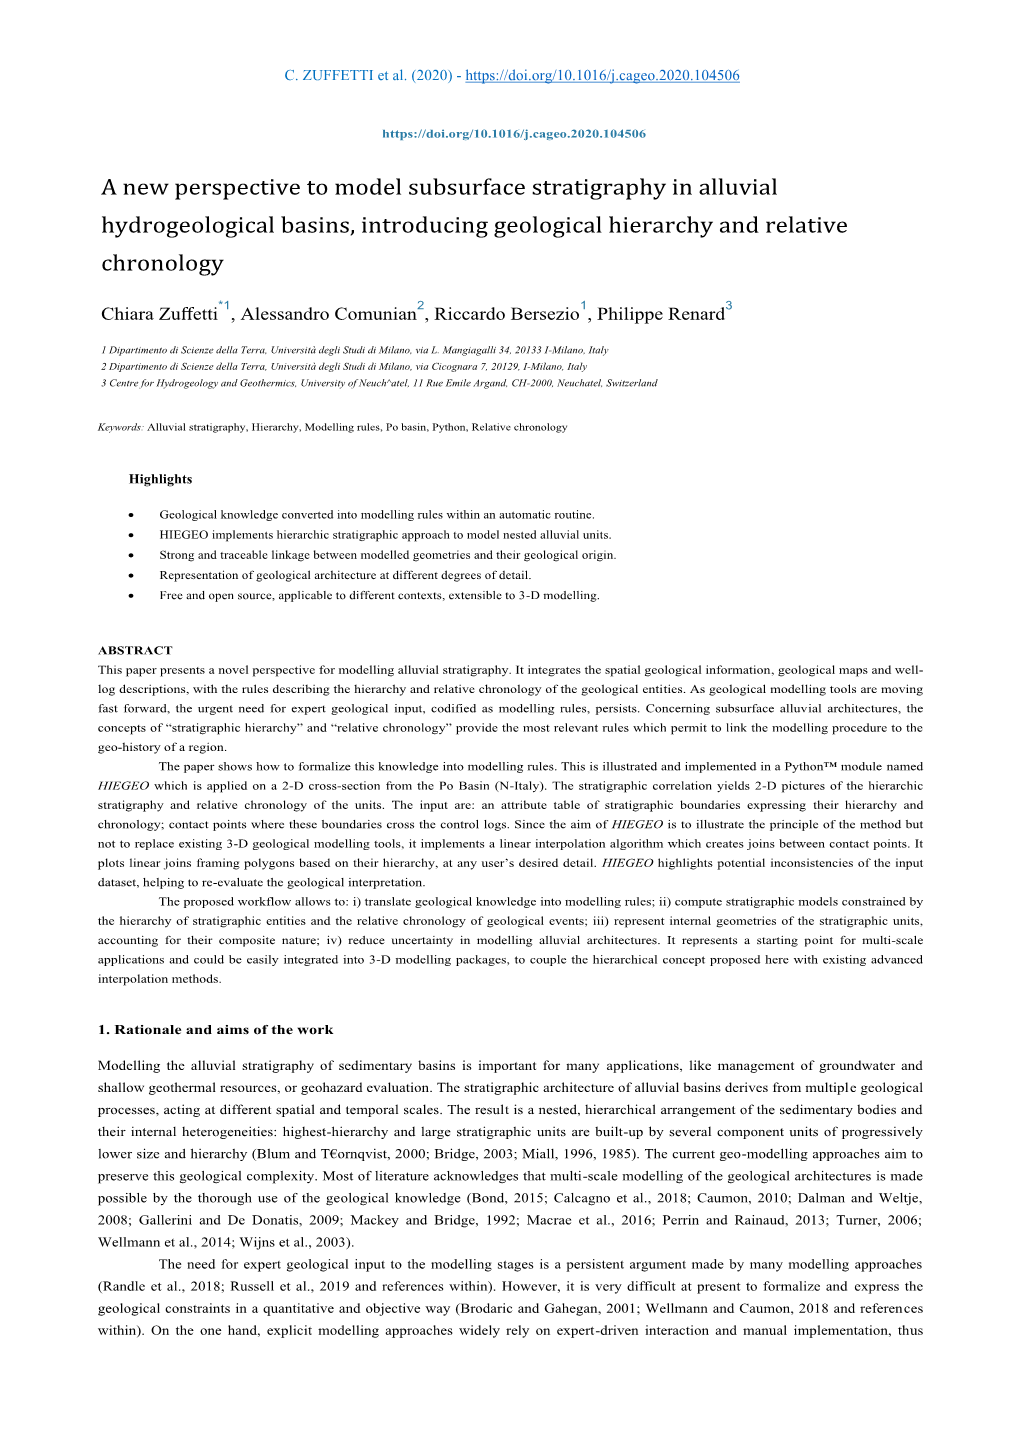 A New Perspective to Model Subsurface Stratigraphy in Alluvial Hydrogeological Basins, Introducing Geological Hierarchy and Relative Chronology